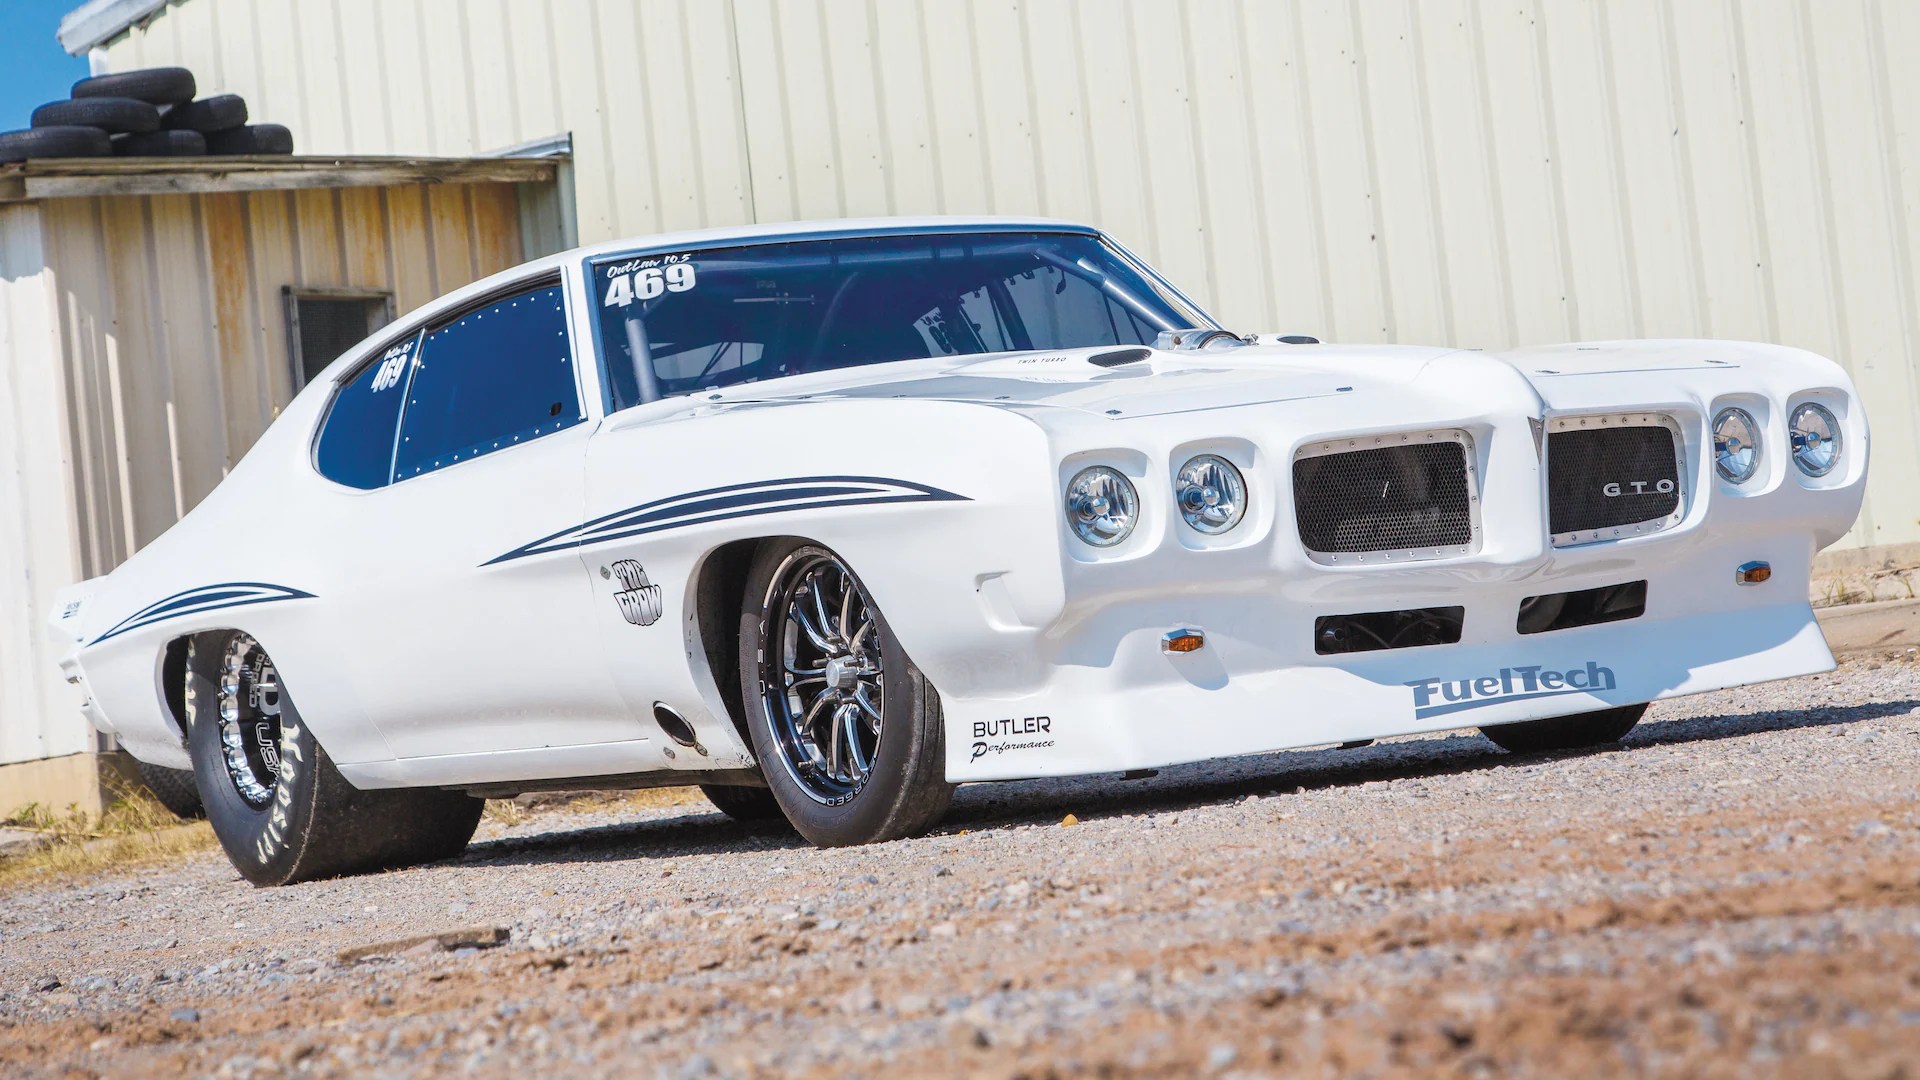 Street Outlaws Justin "Big Chief" Shearer and his 1972 Pontiac LeMans